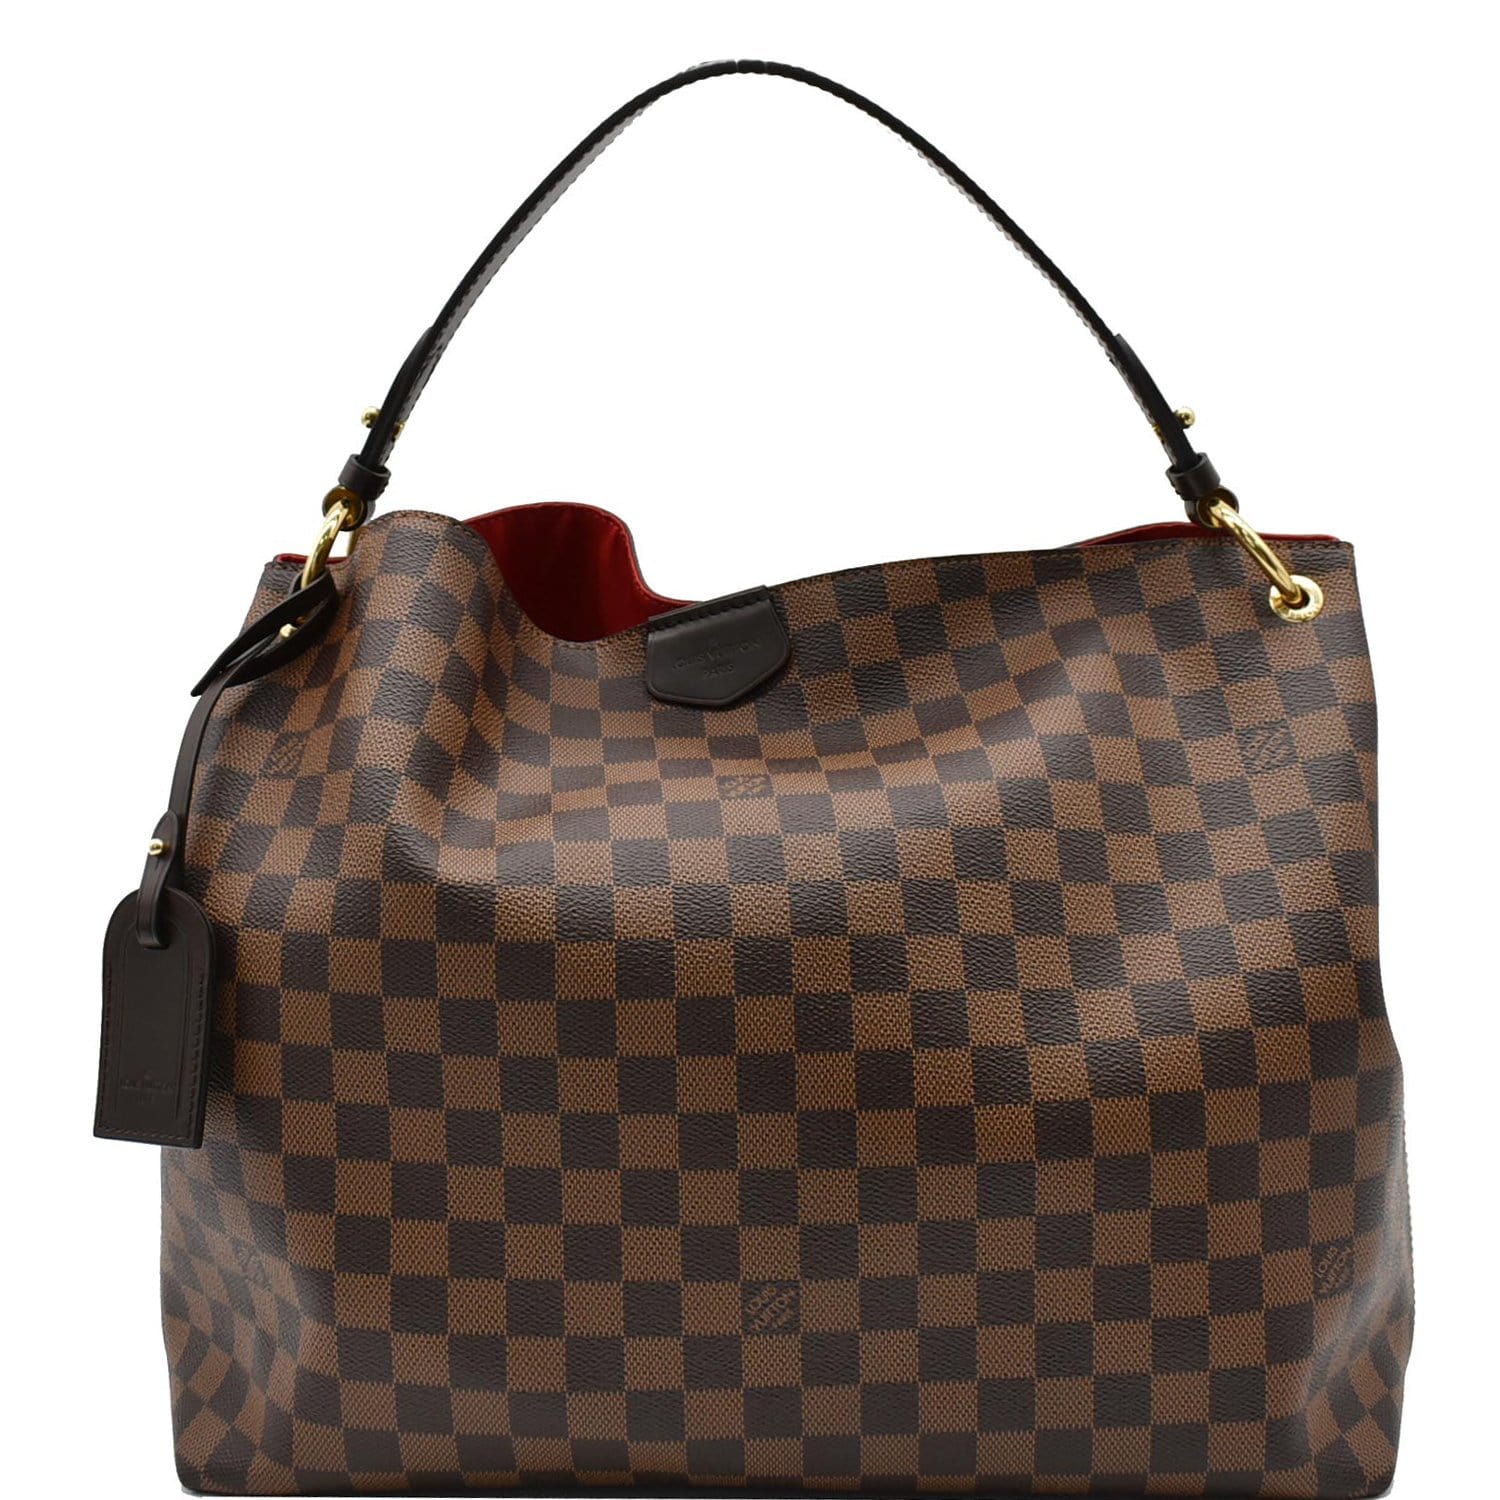 Louis Vuitton Sold Out Everwhere Brand New Damier Ebene Graceful